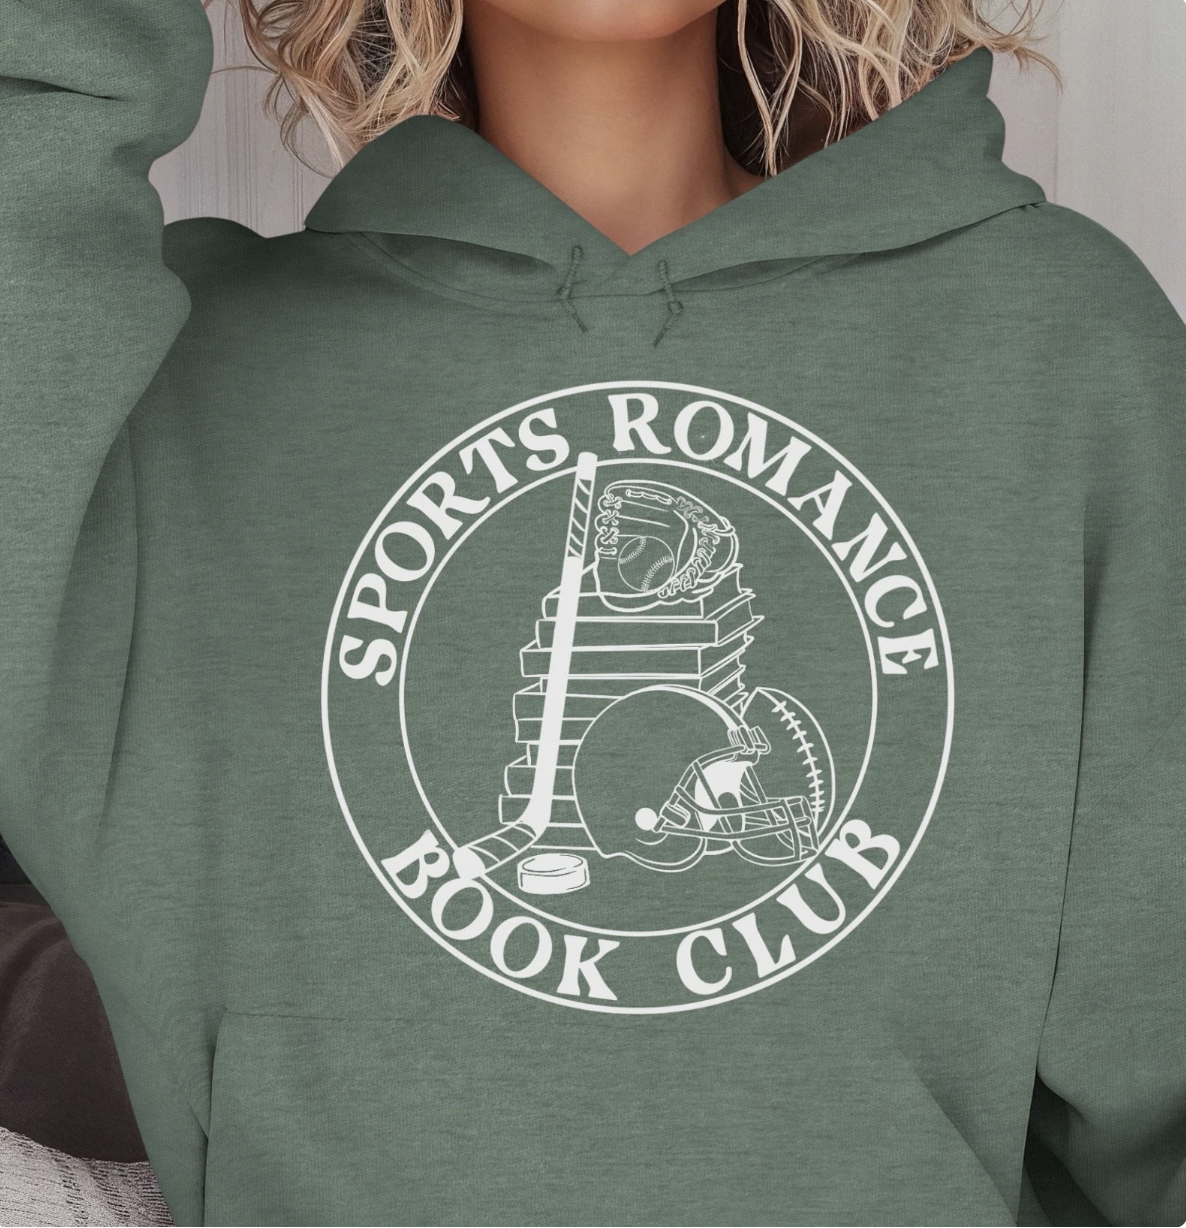 photo of a green hoodie with a round white logo that says "sports romance book club" with an illustration of a stack of book with various sports equipment